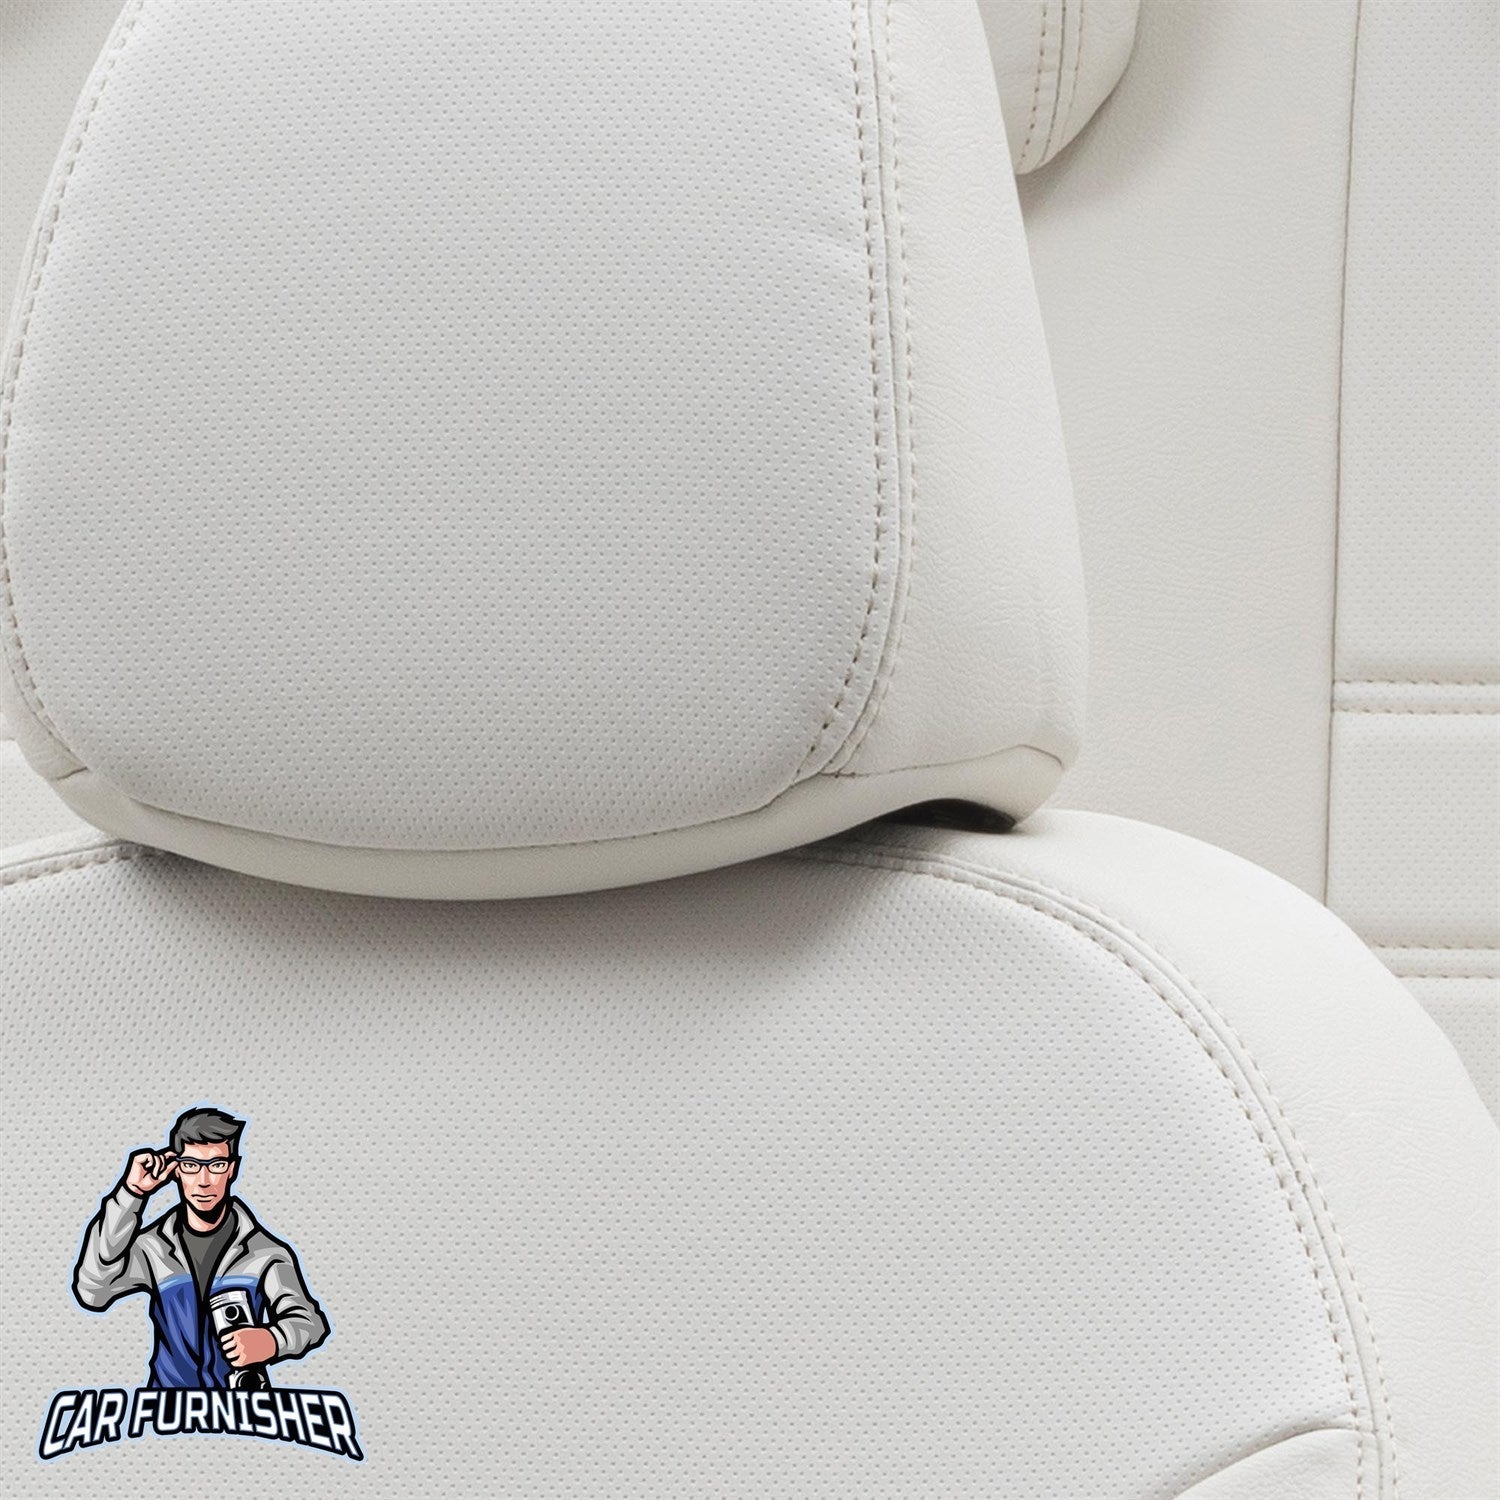 Peugeot 206 Seat Covers Istanbul Leather Design Ivory Leather